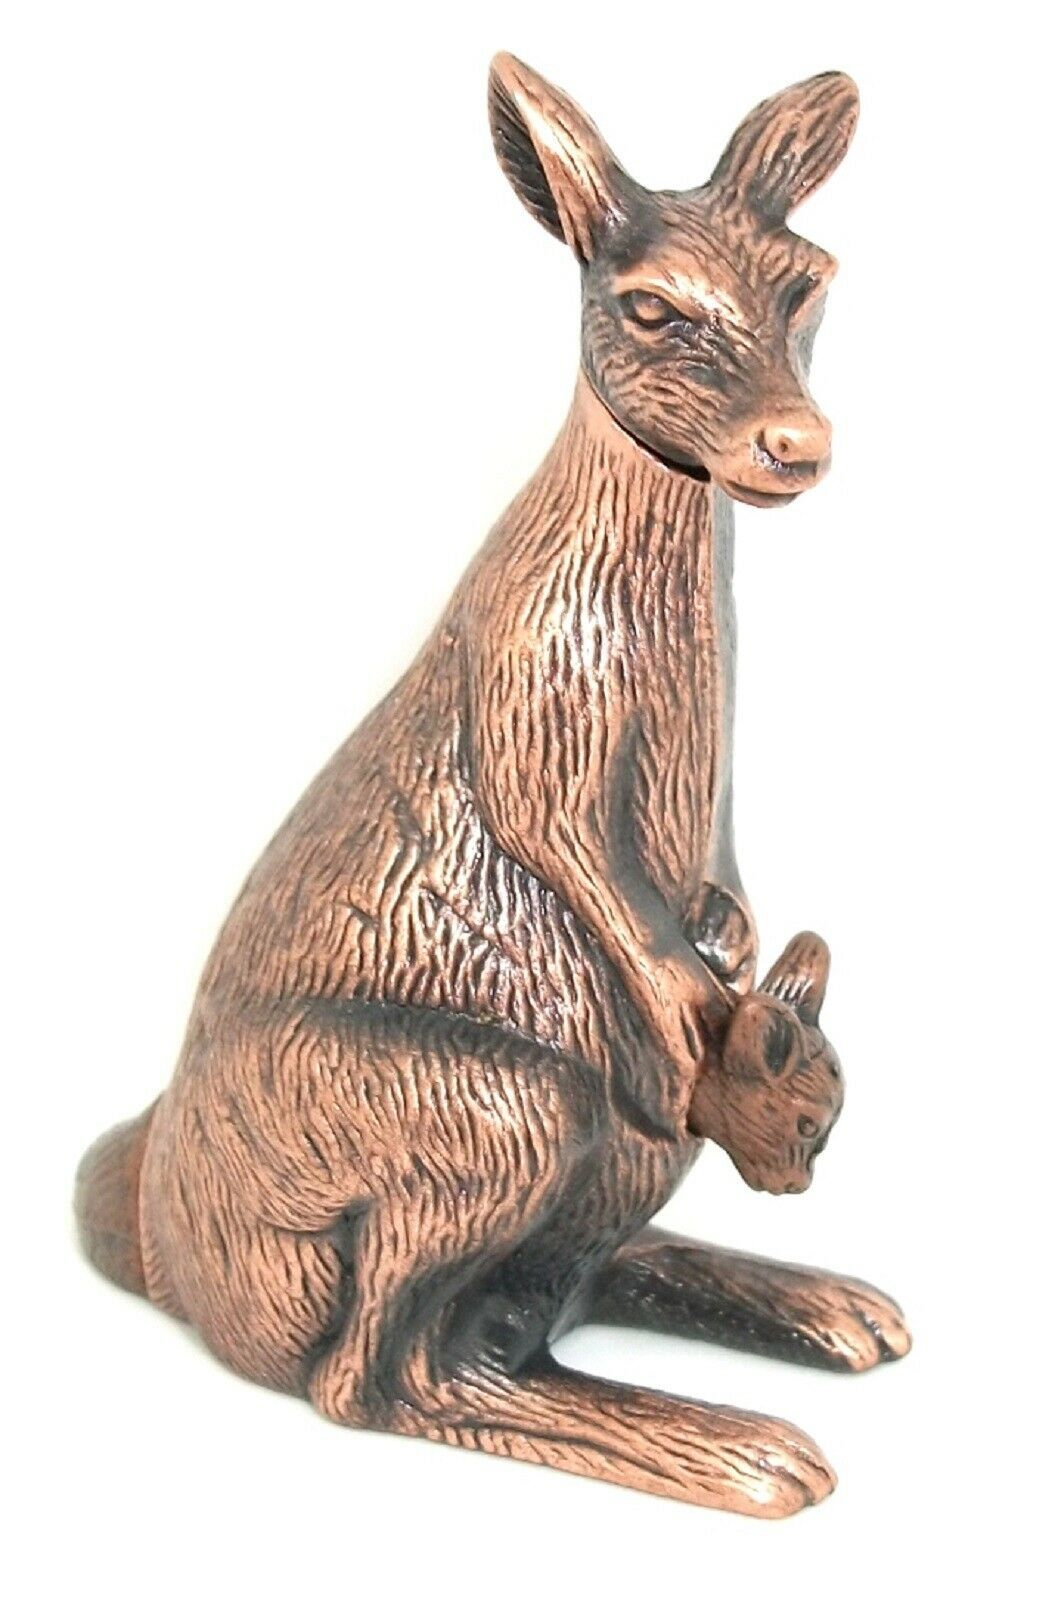 Primary image for Kangaroo Die Cast Metal Collectible Pencil Sharpener